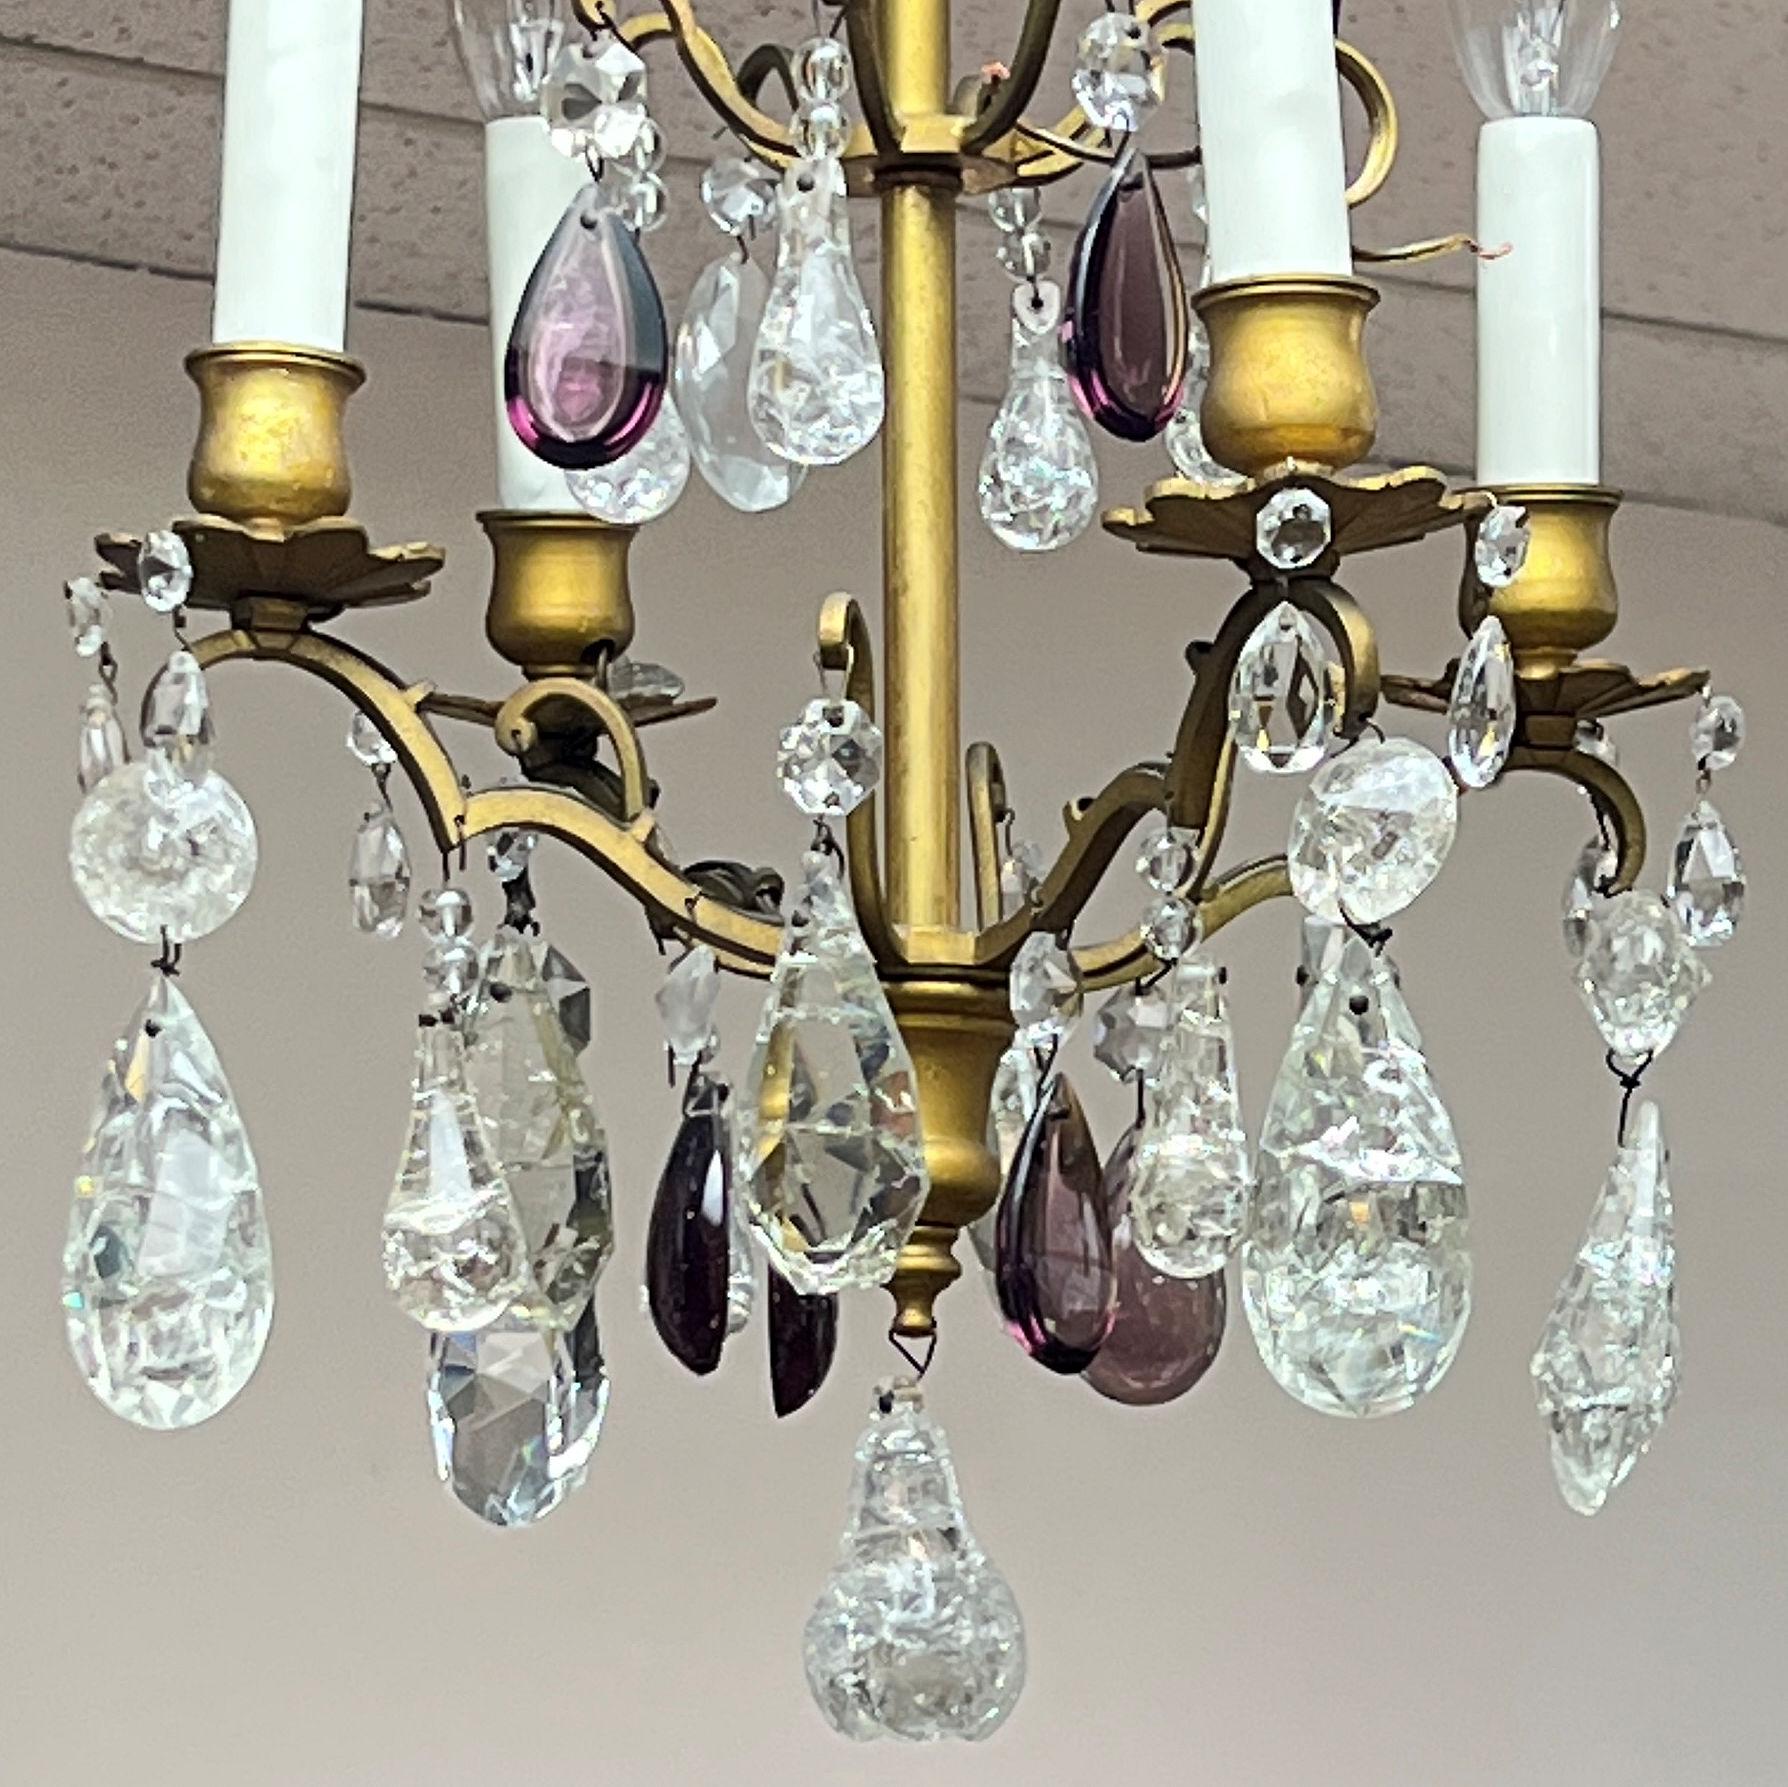 Antique Belle Epoque Period Rock Crystal and Bronze Chandelier For Sale 2